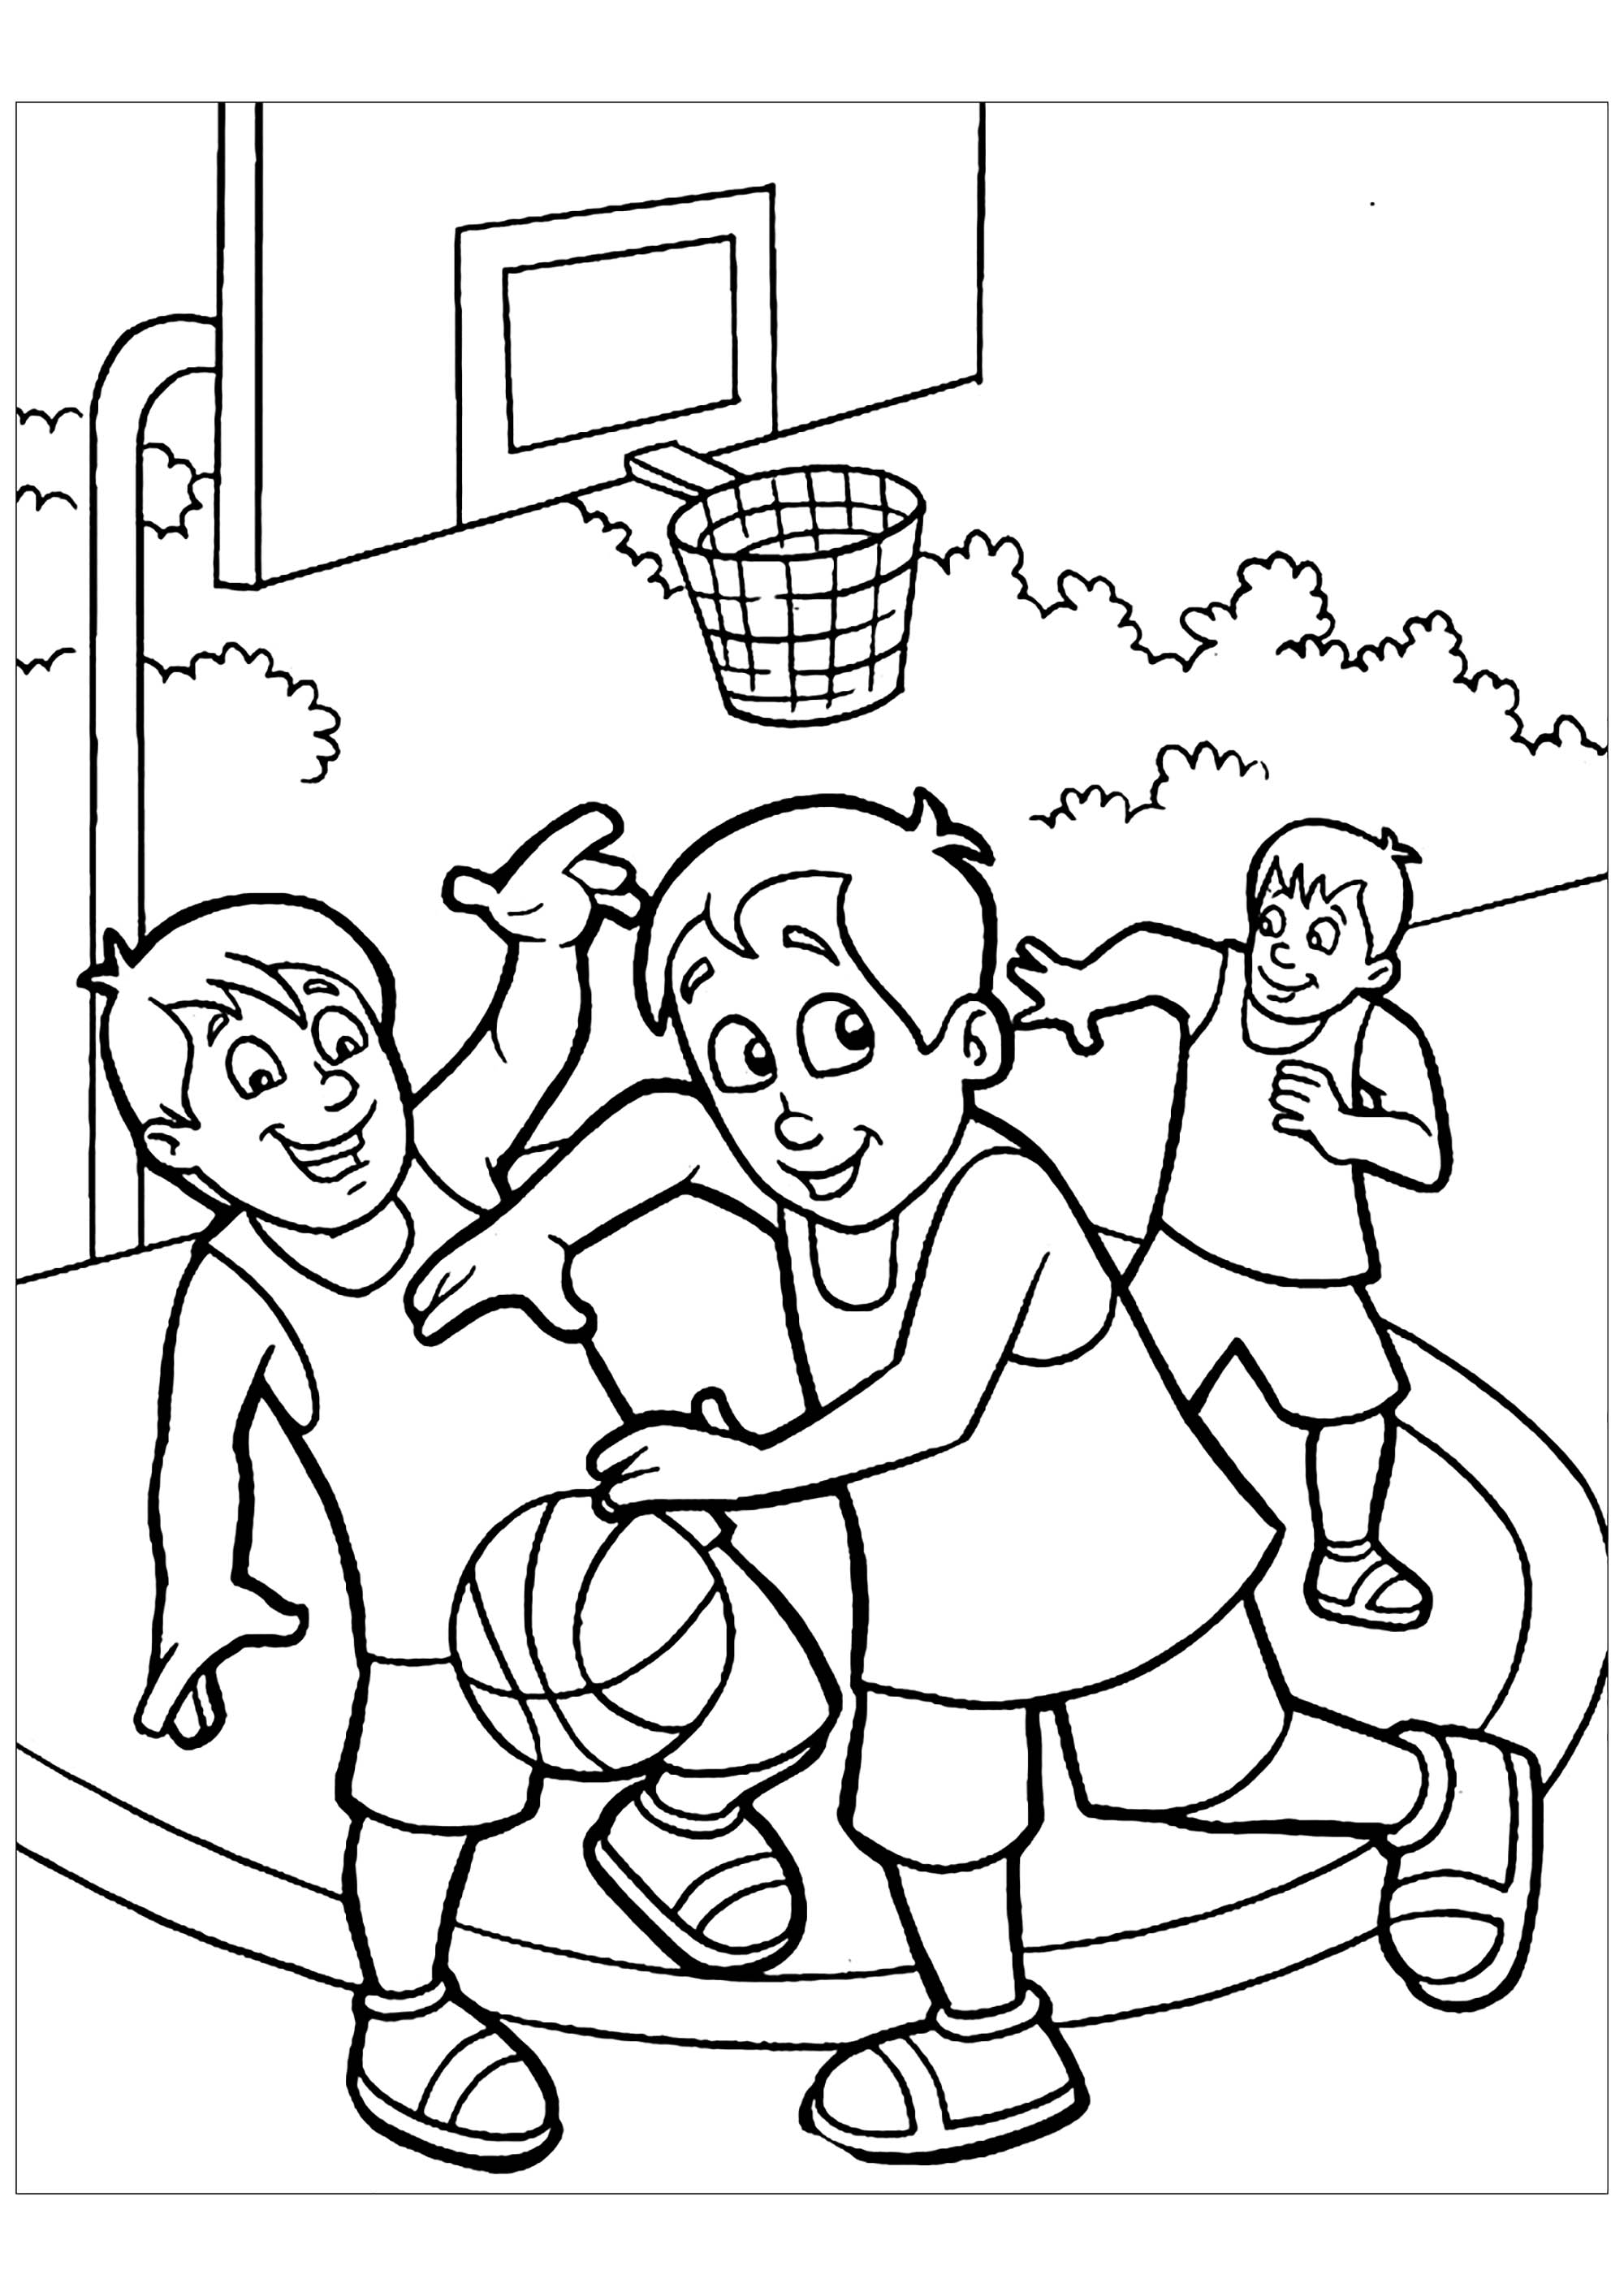 Fun basketball coloring pages to print and color